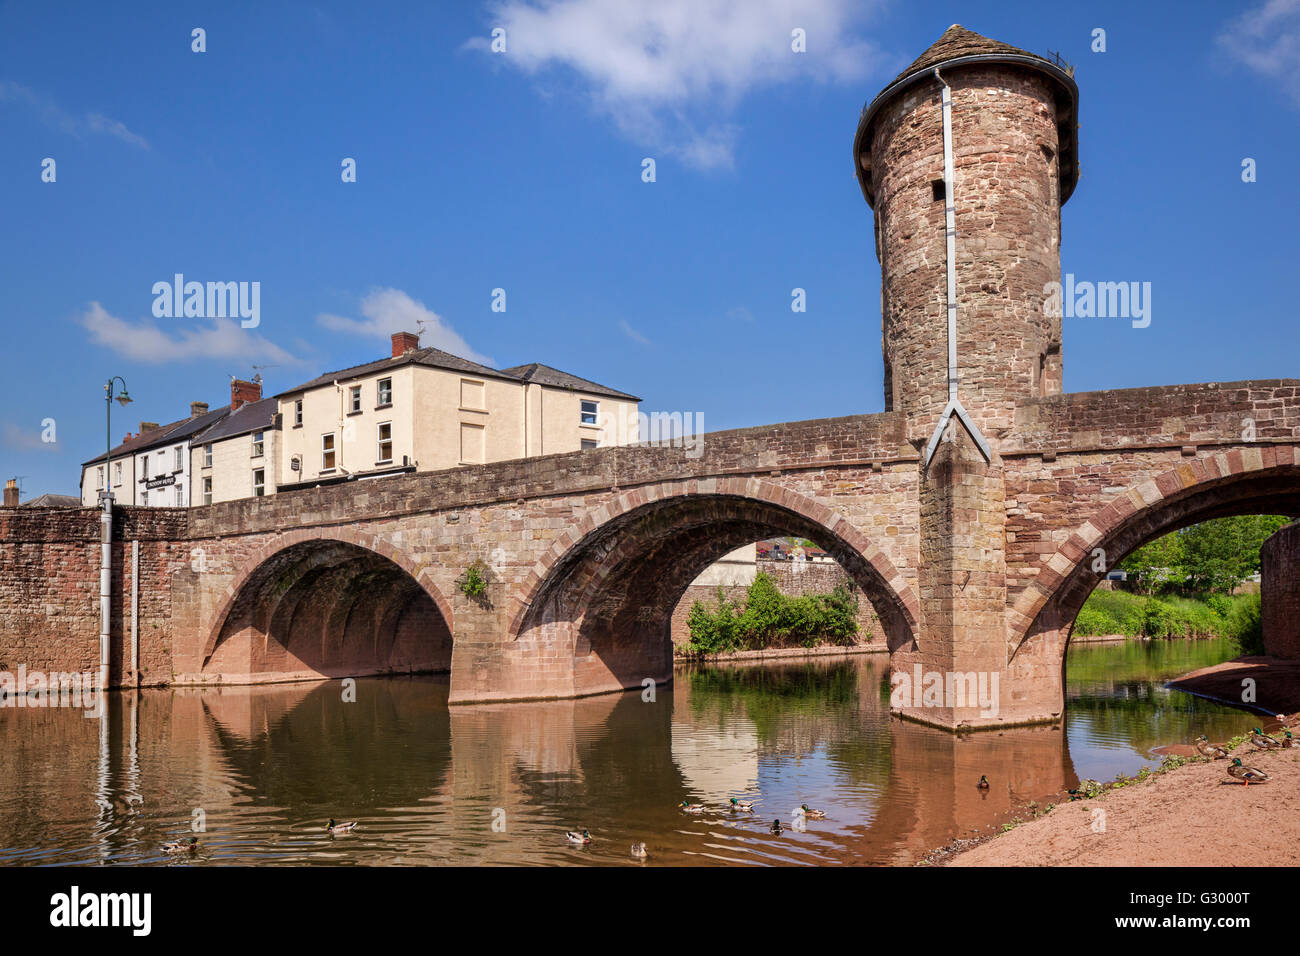 The Monnow Bridge across the River Monnow with its gatehouse on the bridge, Monmouth, Monmouthshire, Wales, UK Stock Photo